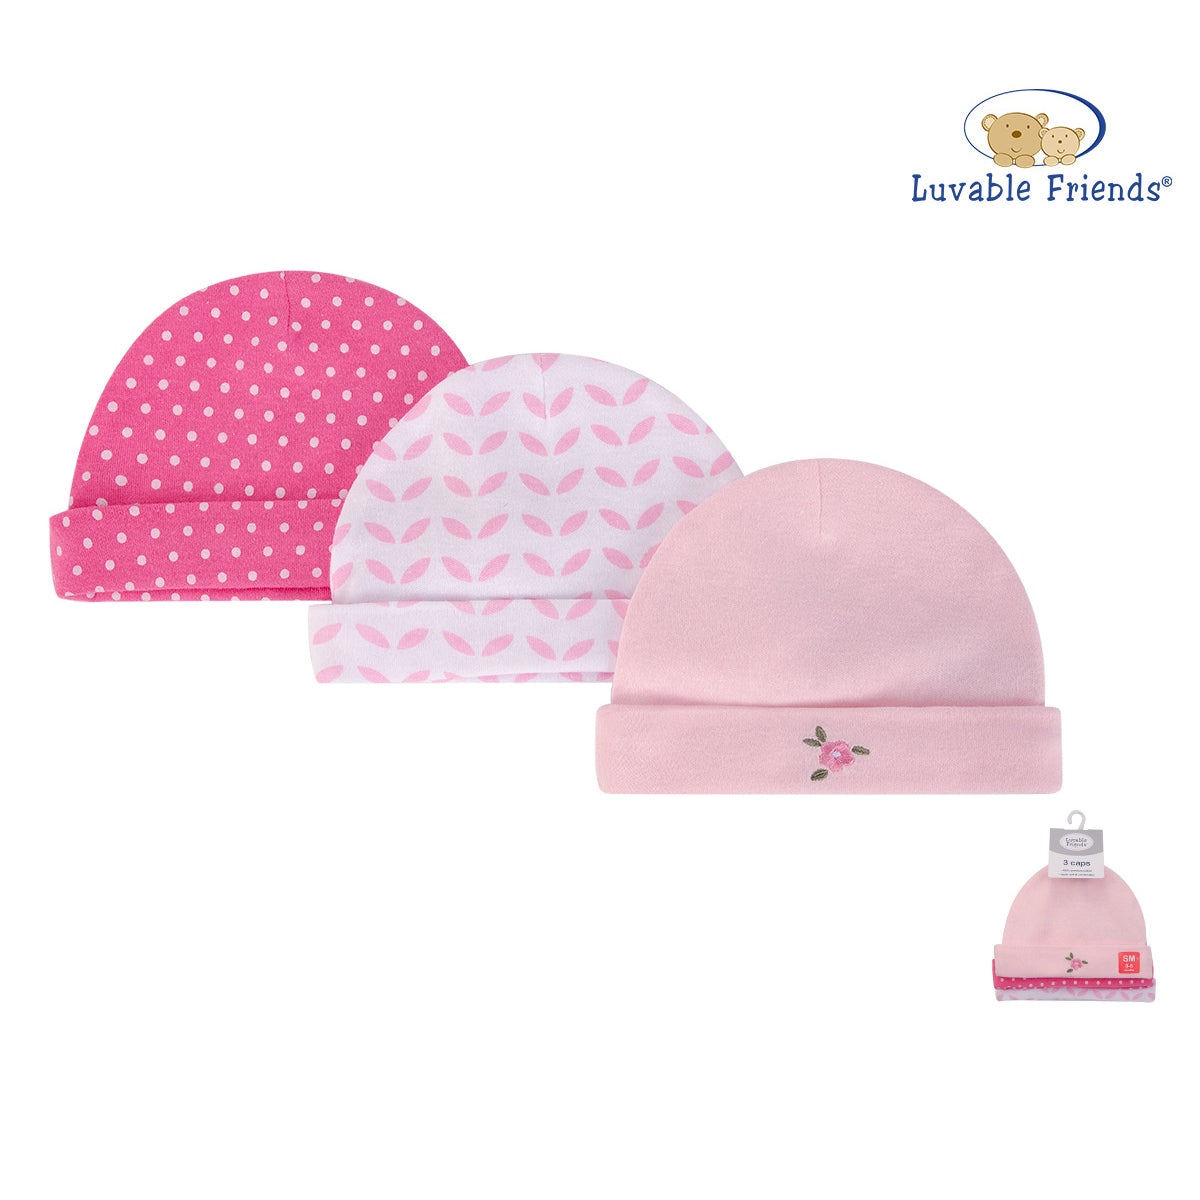 Luvable Friends Baby Hats 3 Pack 34729 - 0528 - Little Kooma